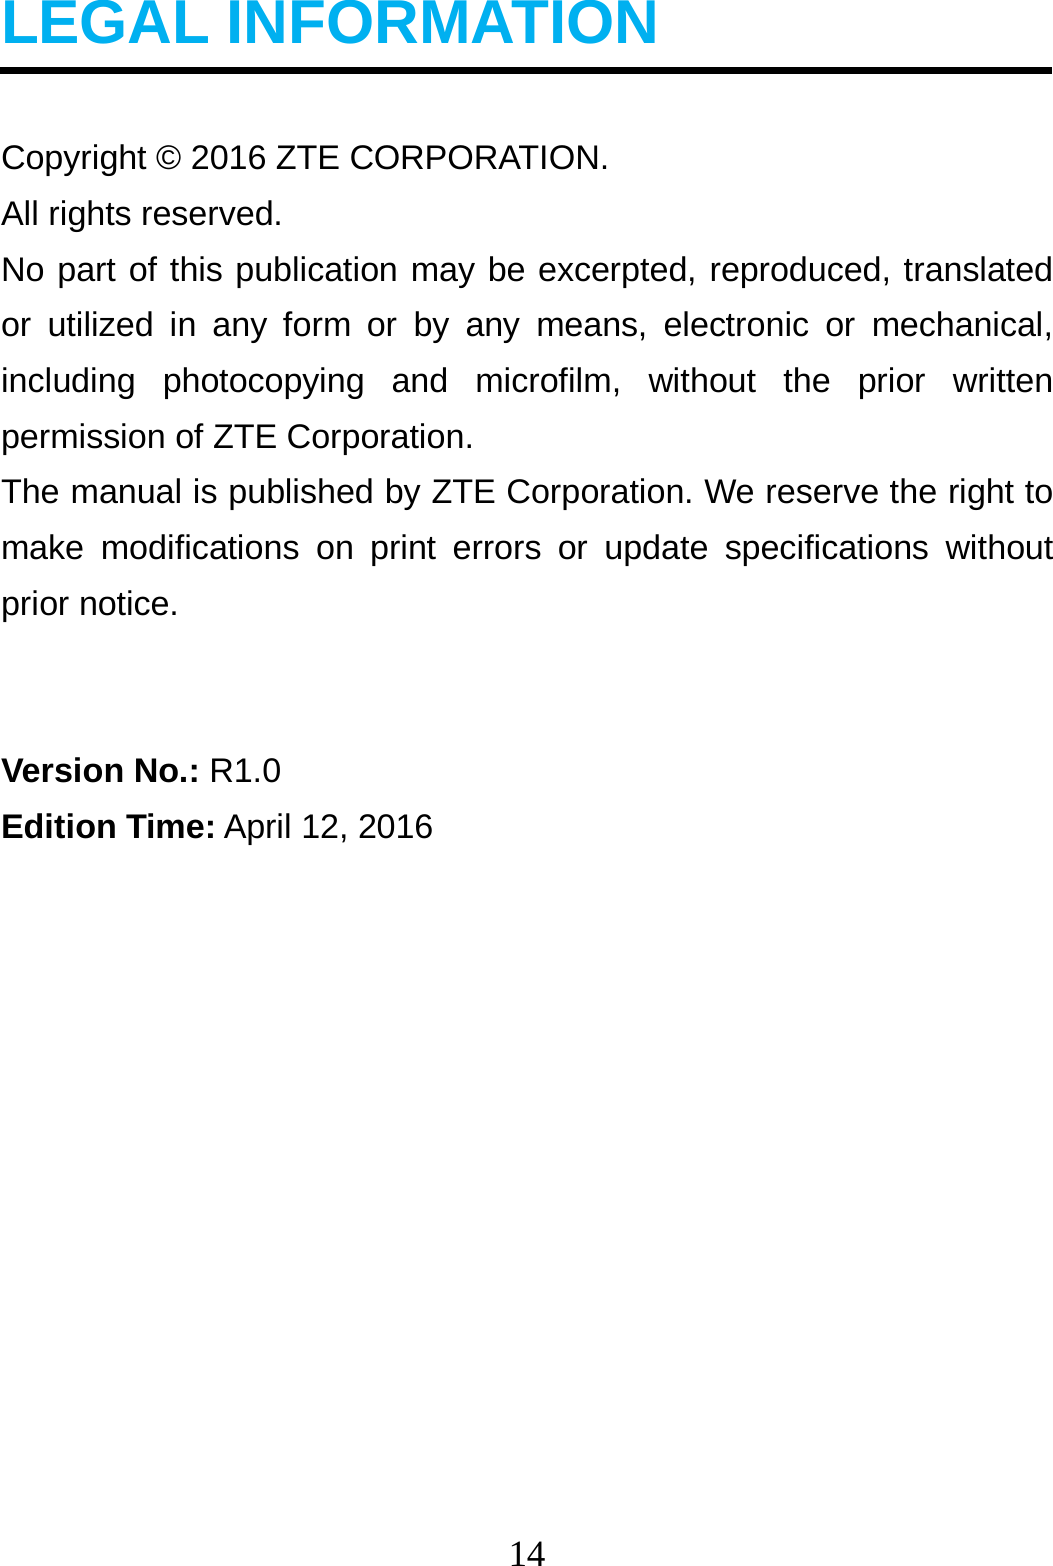 14  LEGAL INFORMATION  Copyright © 2016 ZTE CORPORATION. All rights reserved.   No part of this publication may be excerpted, reproduced, translated or utilized in any form or by any means, electronic or mechanical, including photocopying and microfilm, without the prior written permission of ZTE Corporation. The manual is published by ZTE Corporation. We reserve the right to make modifications on print errors or update specifications without prior notice.   Version No.: R1.0 Edition Time: April 12, 2016            